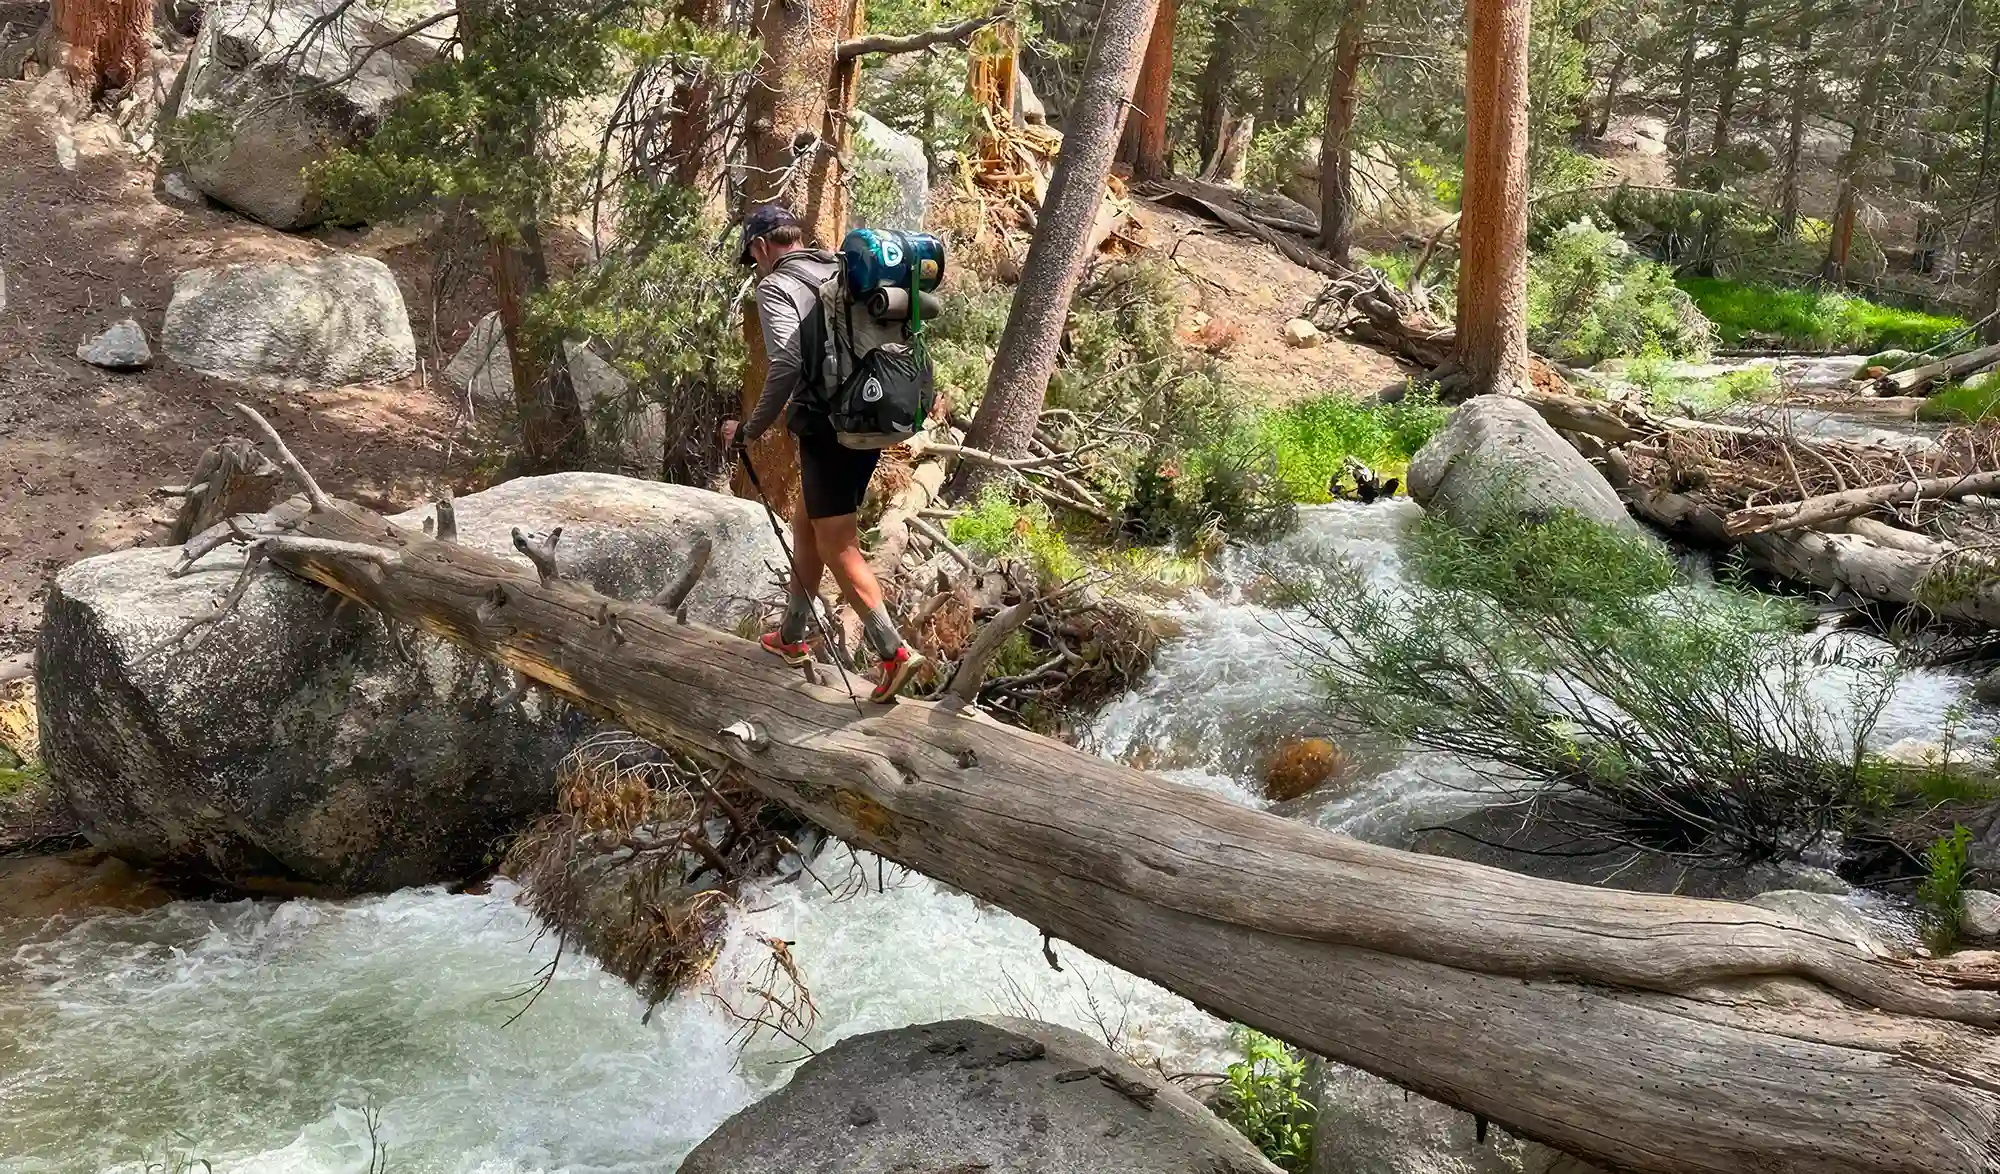 Suffering from multiple sclerosis, Dan Slater overcomes the 800-kilometer section of the PCT.